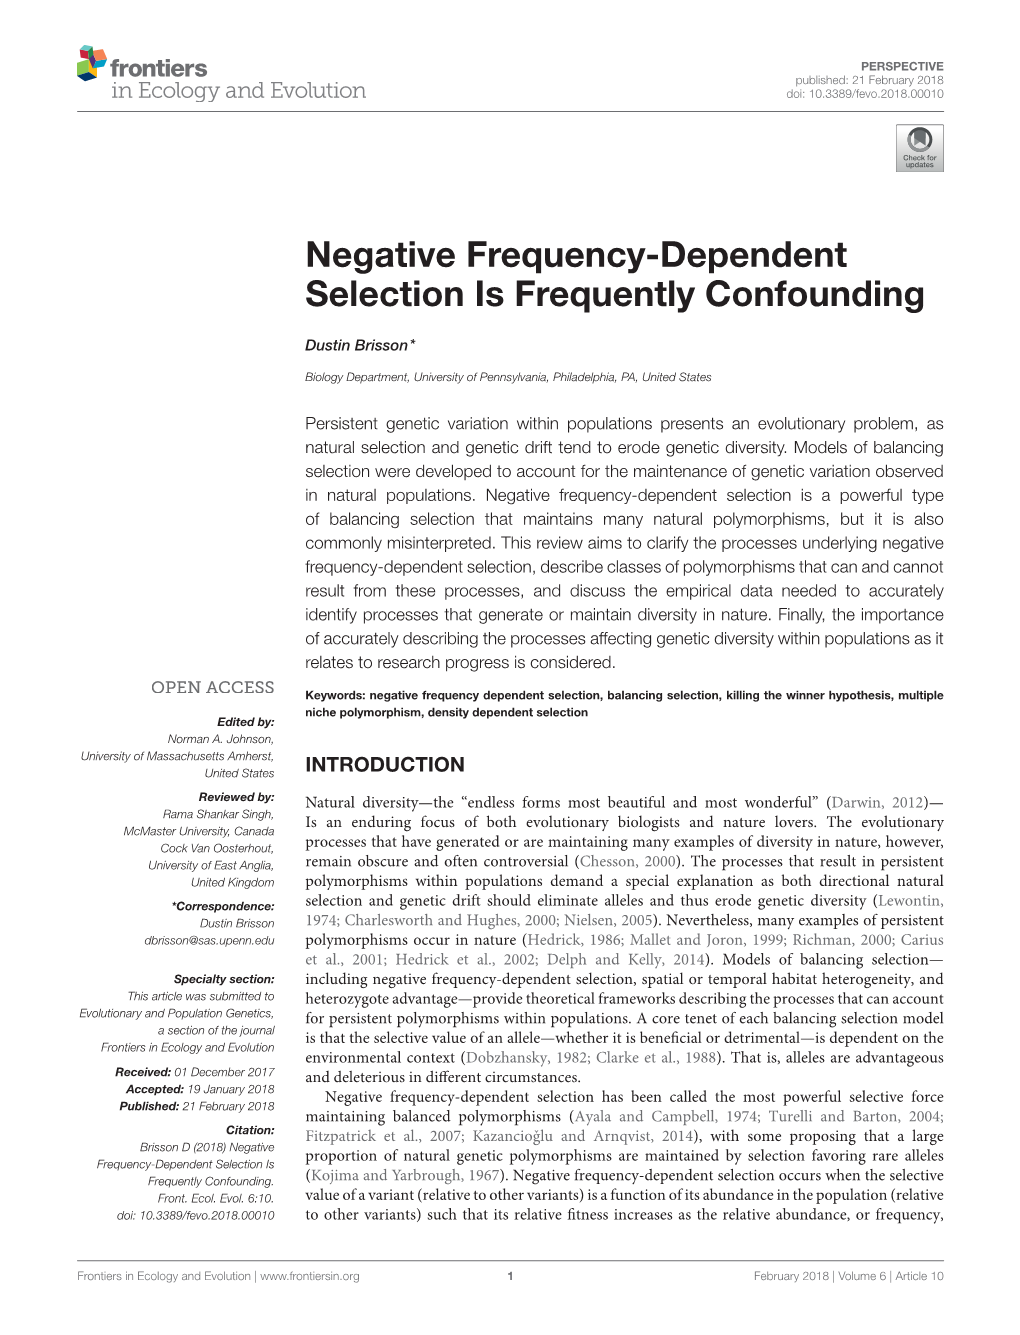 Negative Frequency-Dependent Selection Is Frequently Confounding